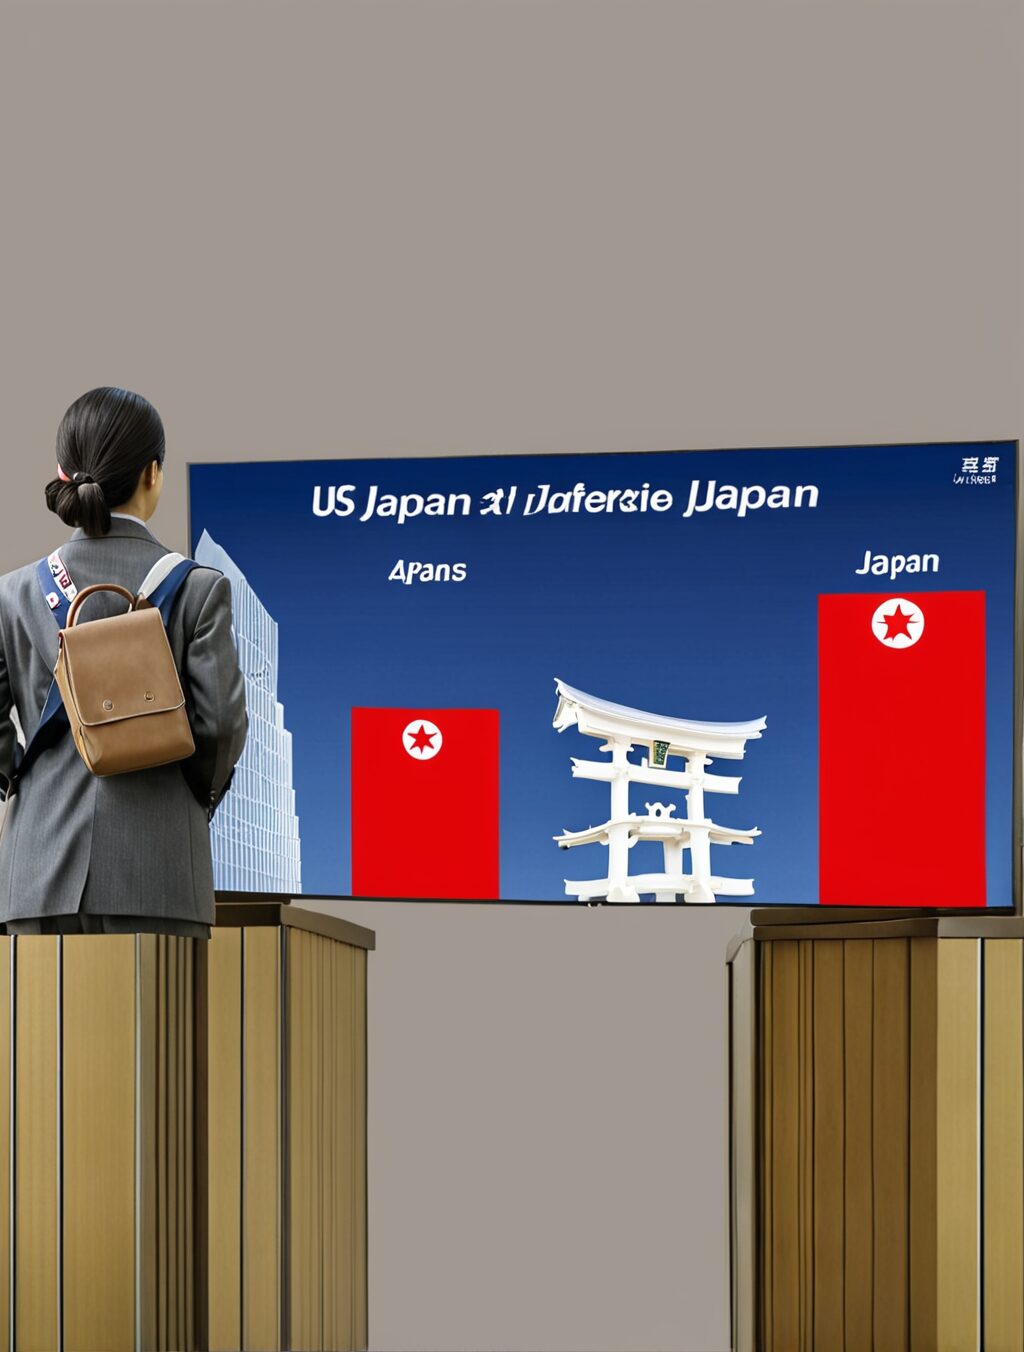 major cultural differences between us and japan